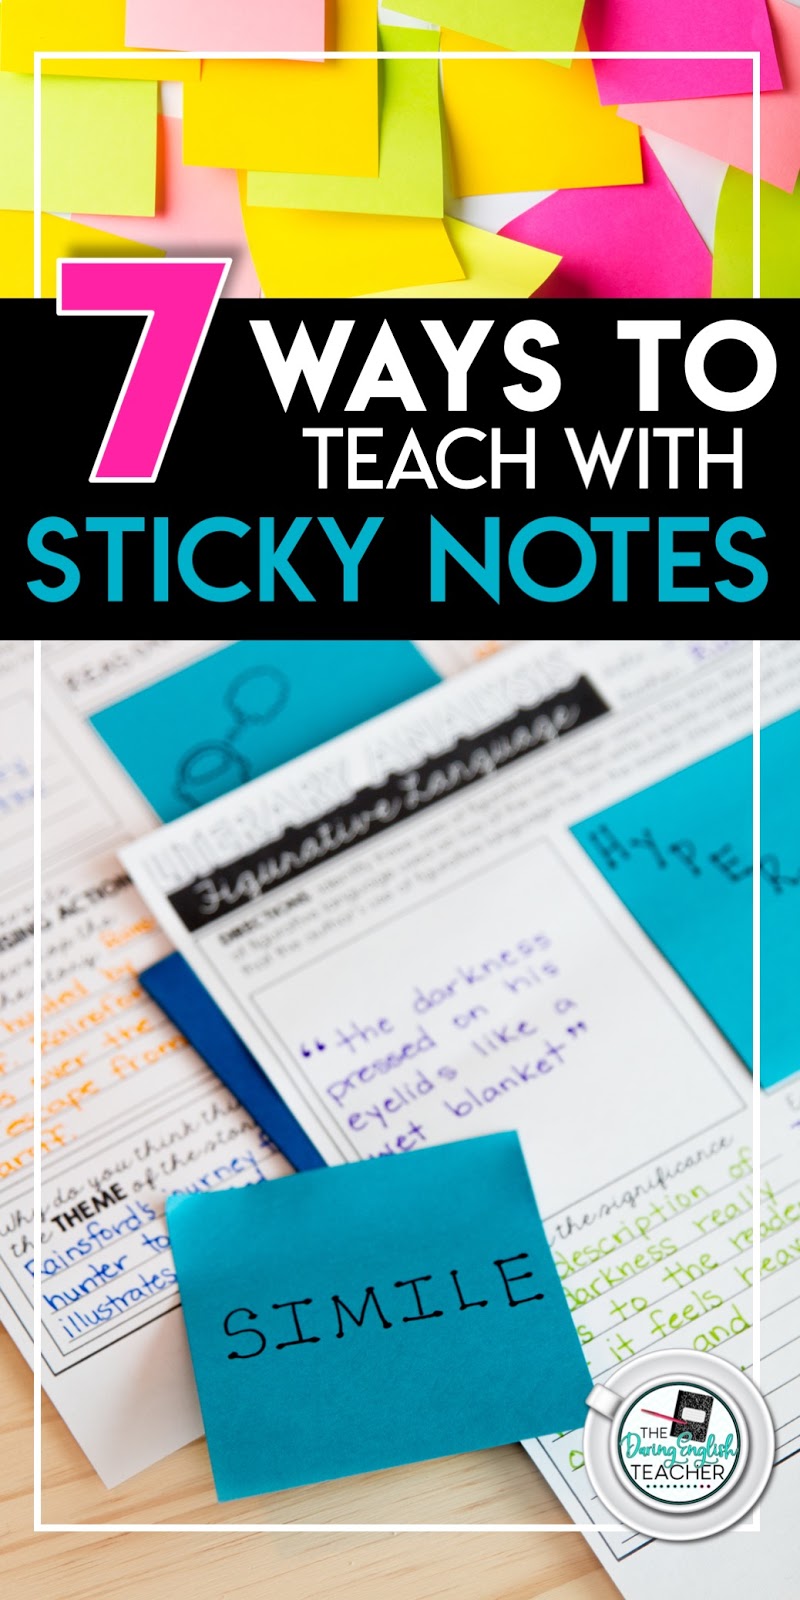 7 Ways to Teach with Sticky Notes - The Secondary English Coffee Shop